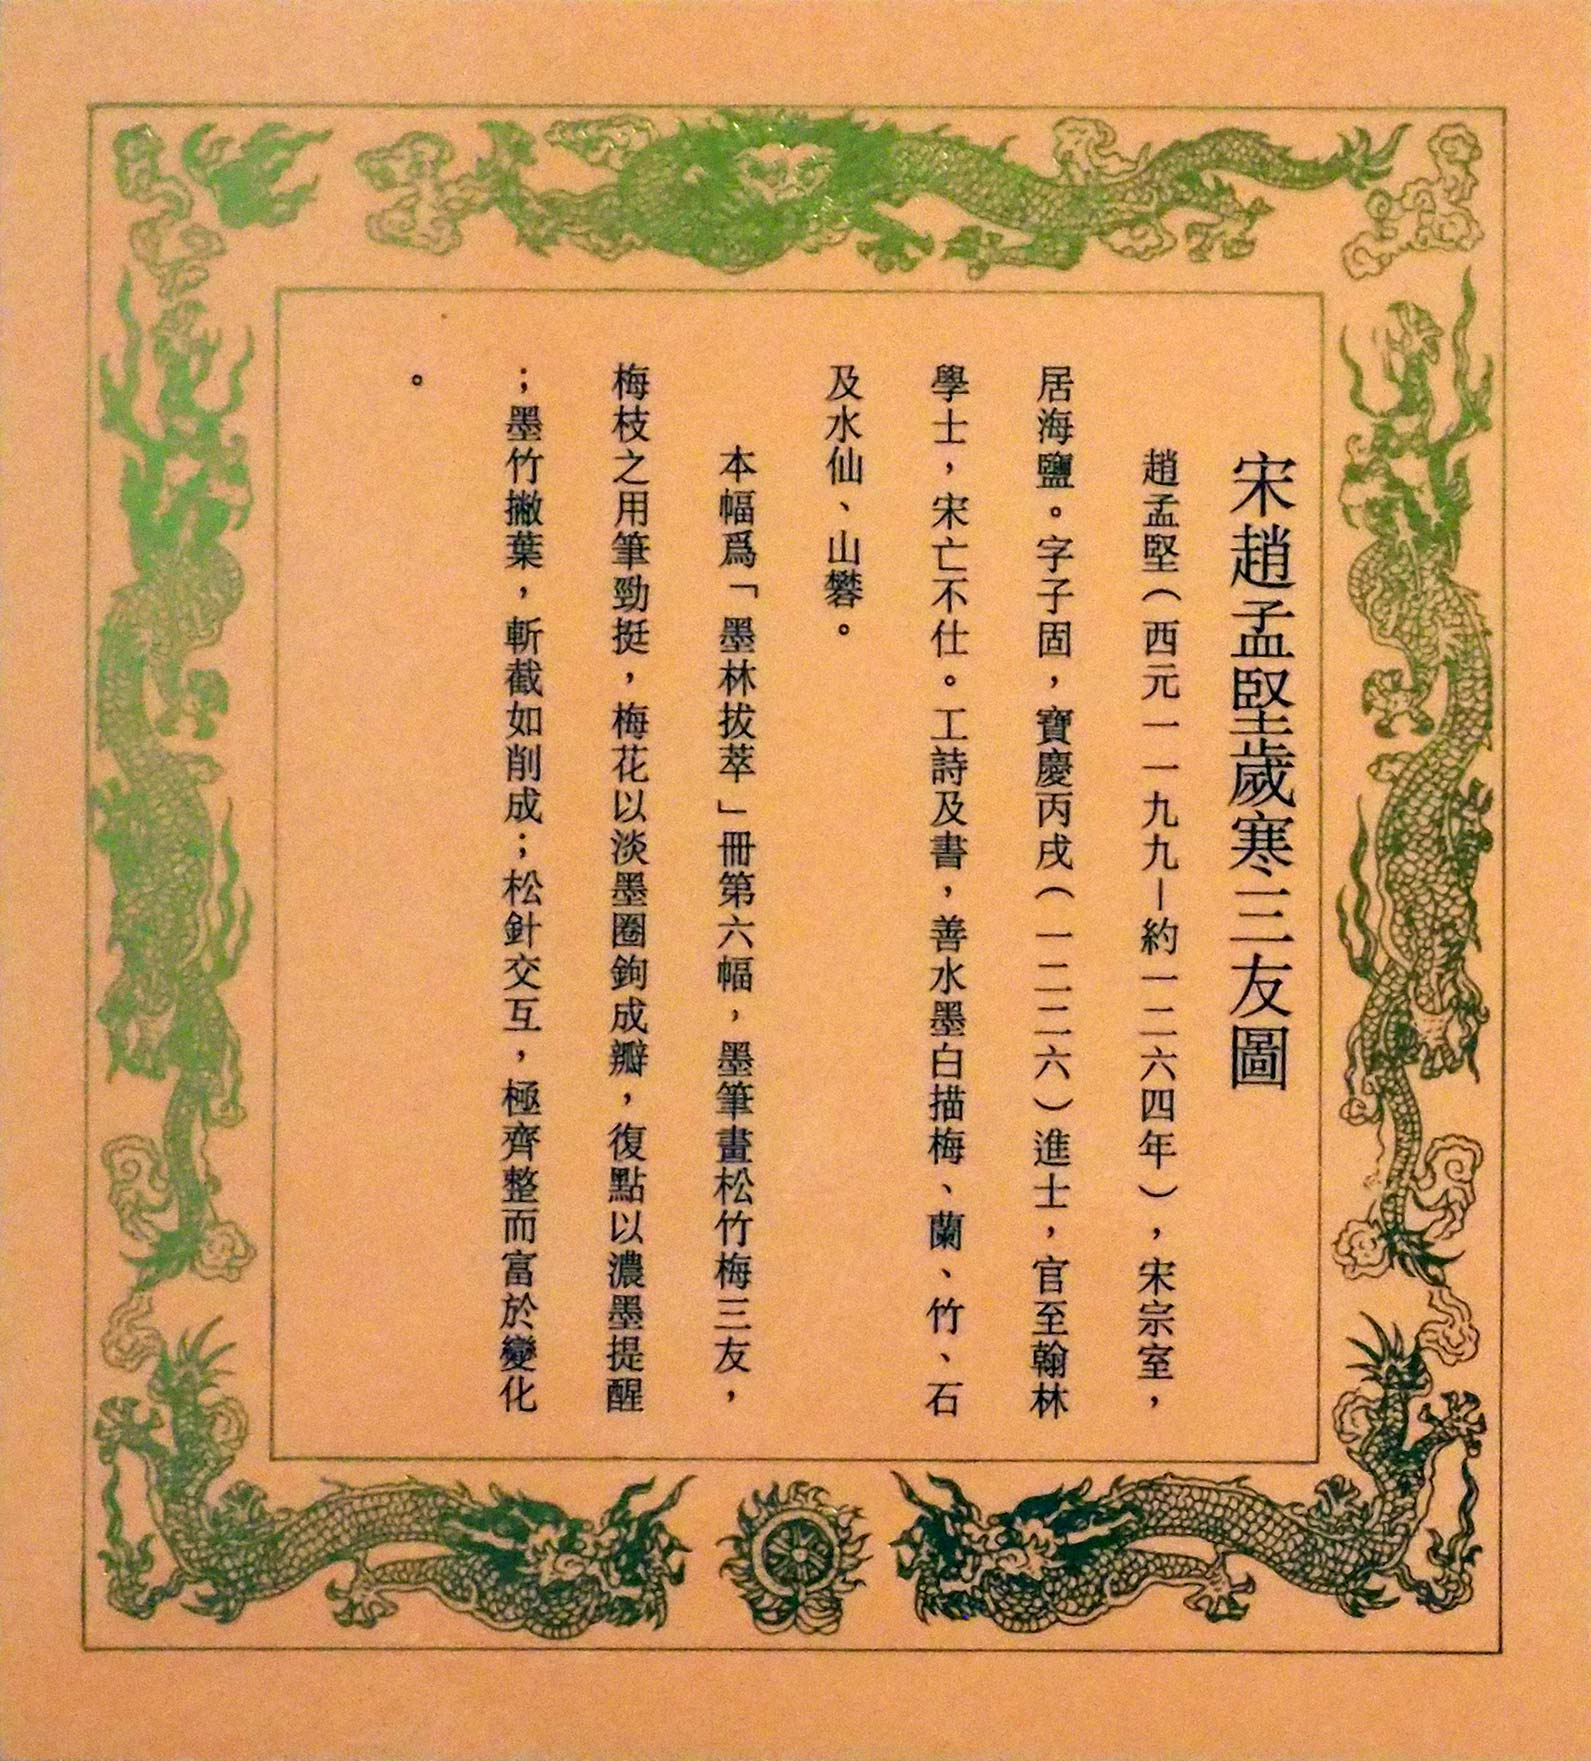 In October of 1995, a special exhibition of "Famous Album Leaves of the Sung Dynasty" was held. To reflect the spirit of national celebrations in that month, special orange-red museum labels with impressed dragon borders in gold ink were specially produced for the occasion.